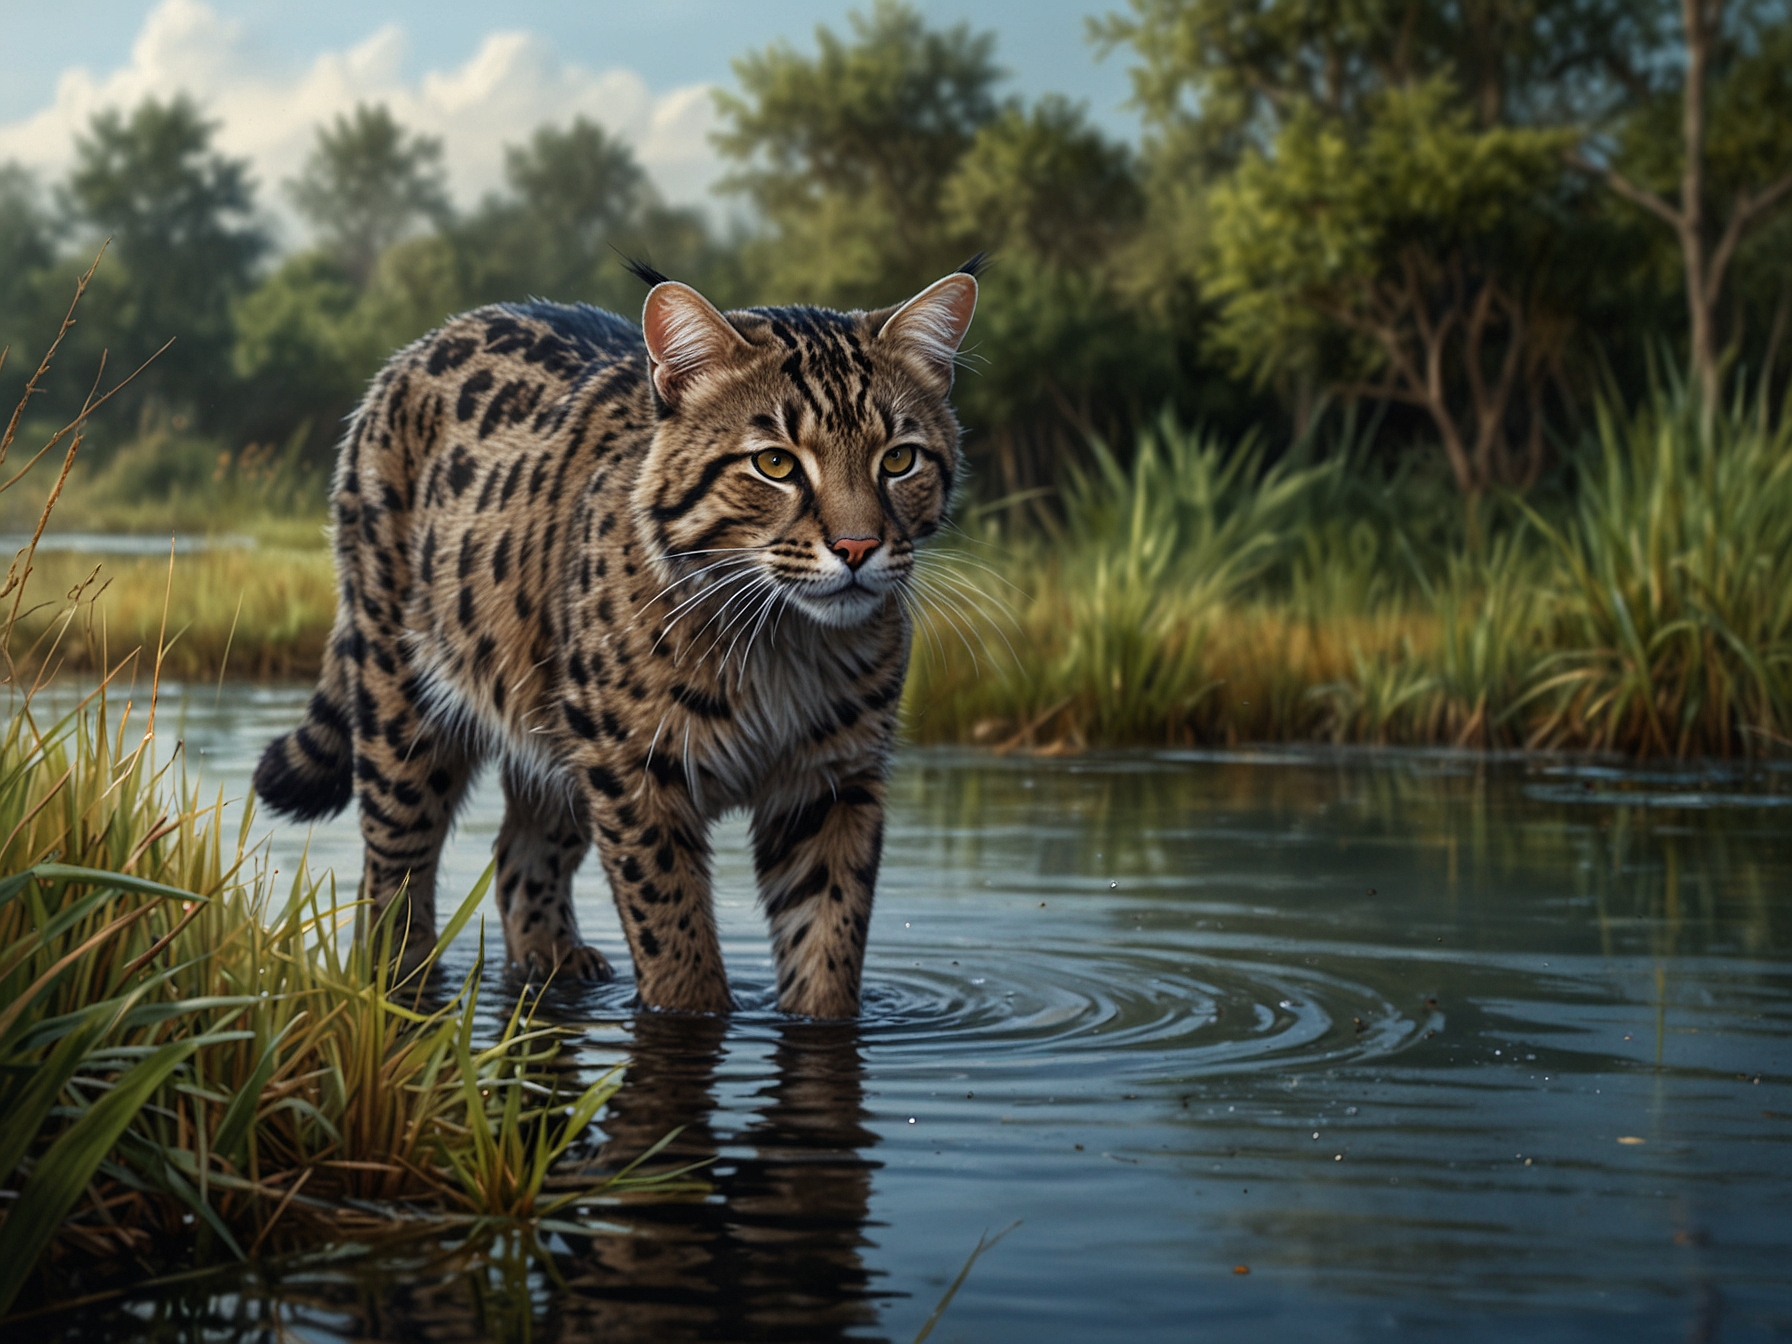 A fishing cat wades in a marsh, showcasing its webbed feet and water-repellent fur. The surroundings depict a wetland, illustrating the cat's natural habitat and highlighting the importance of wetland conservation.